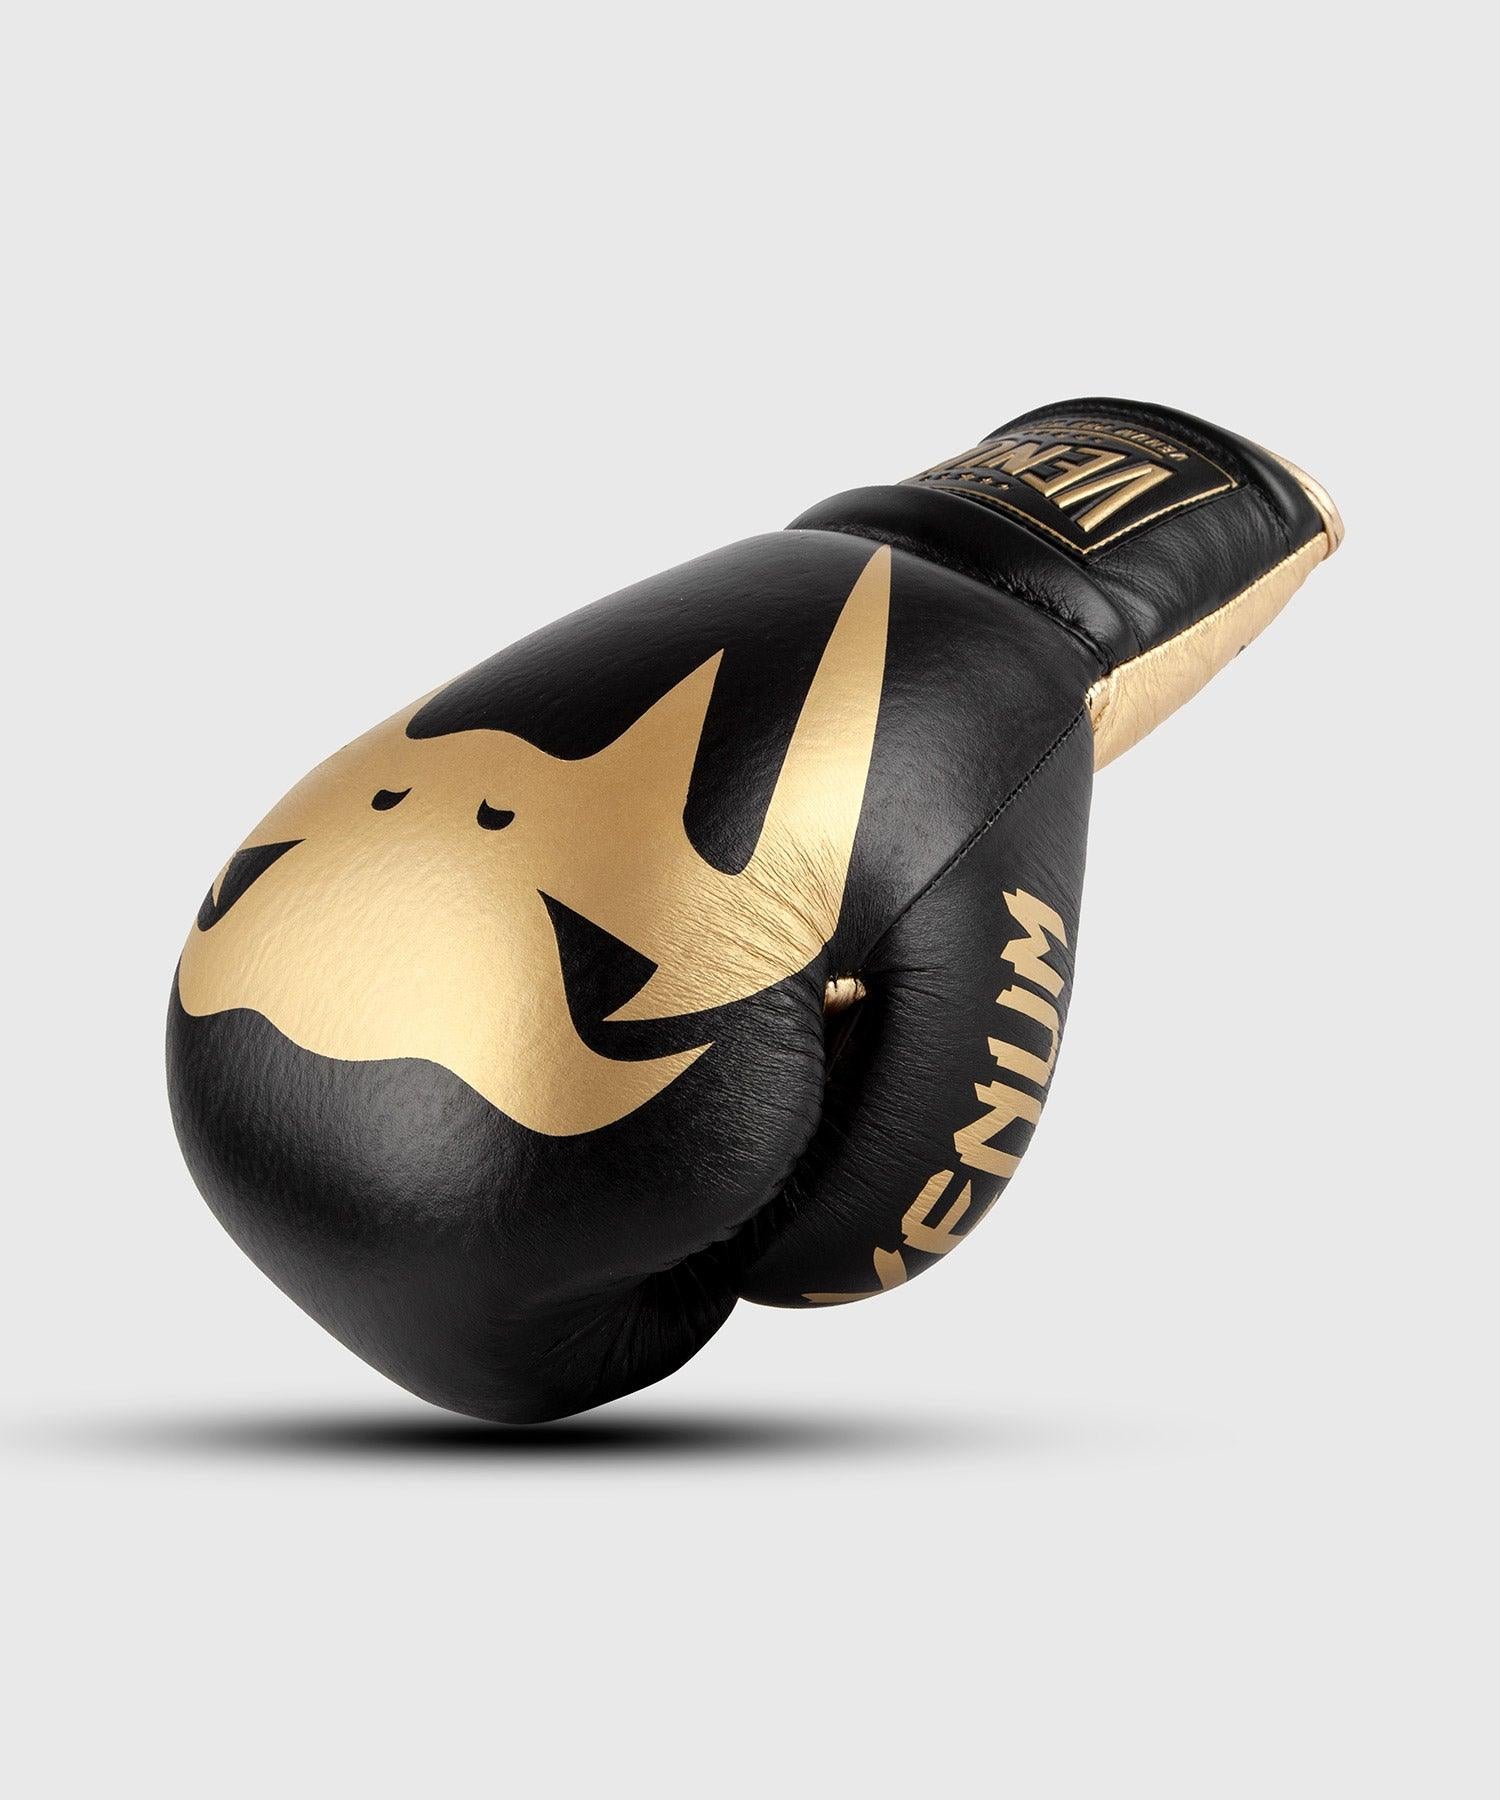 Venum Giant 2.0 Pro Boxing Gloves - With Laces - Black/Gold Picture 1